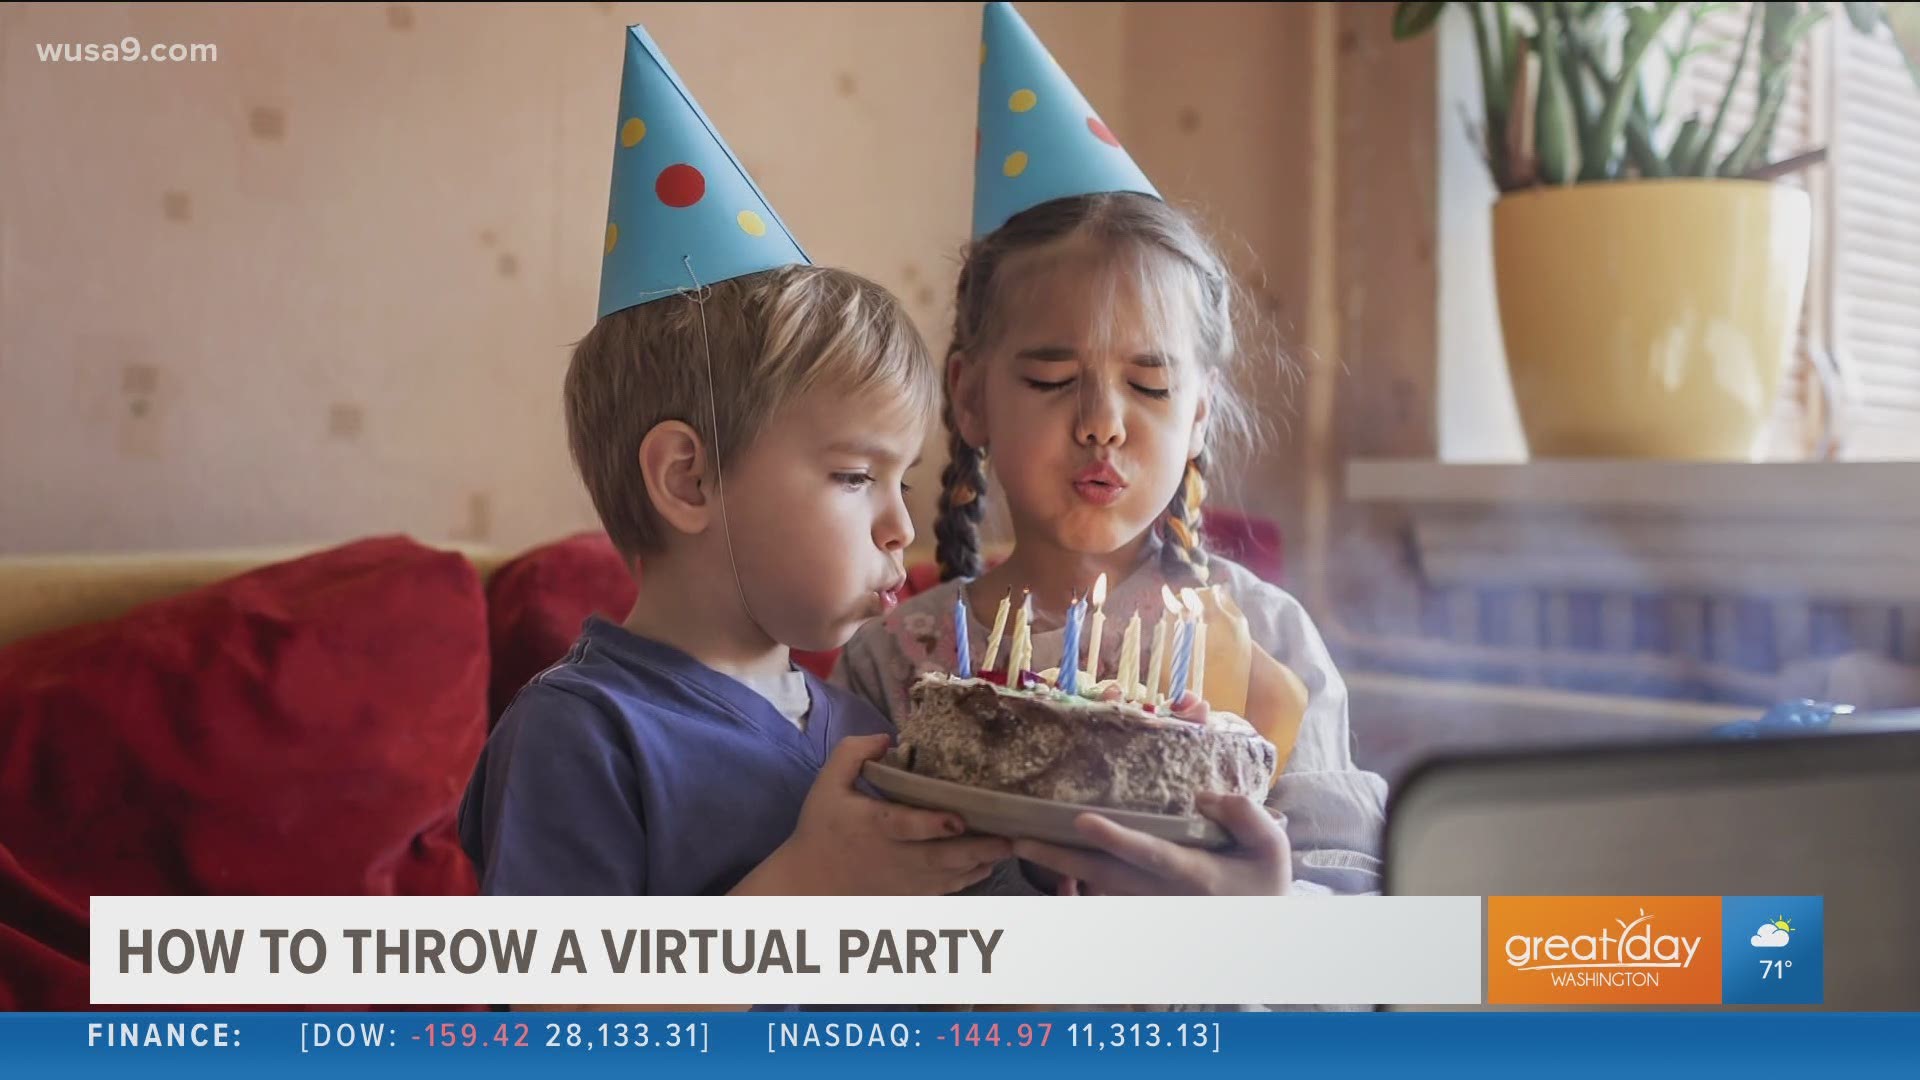 Event planner Amy Nichols has some expert tips on throwing a virtual party.